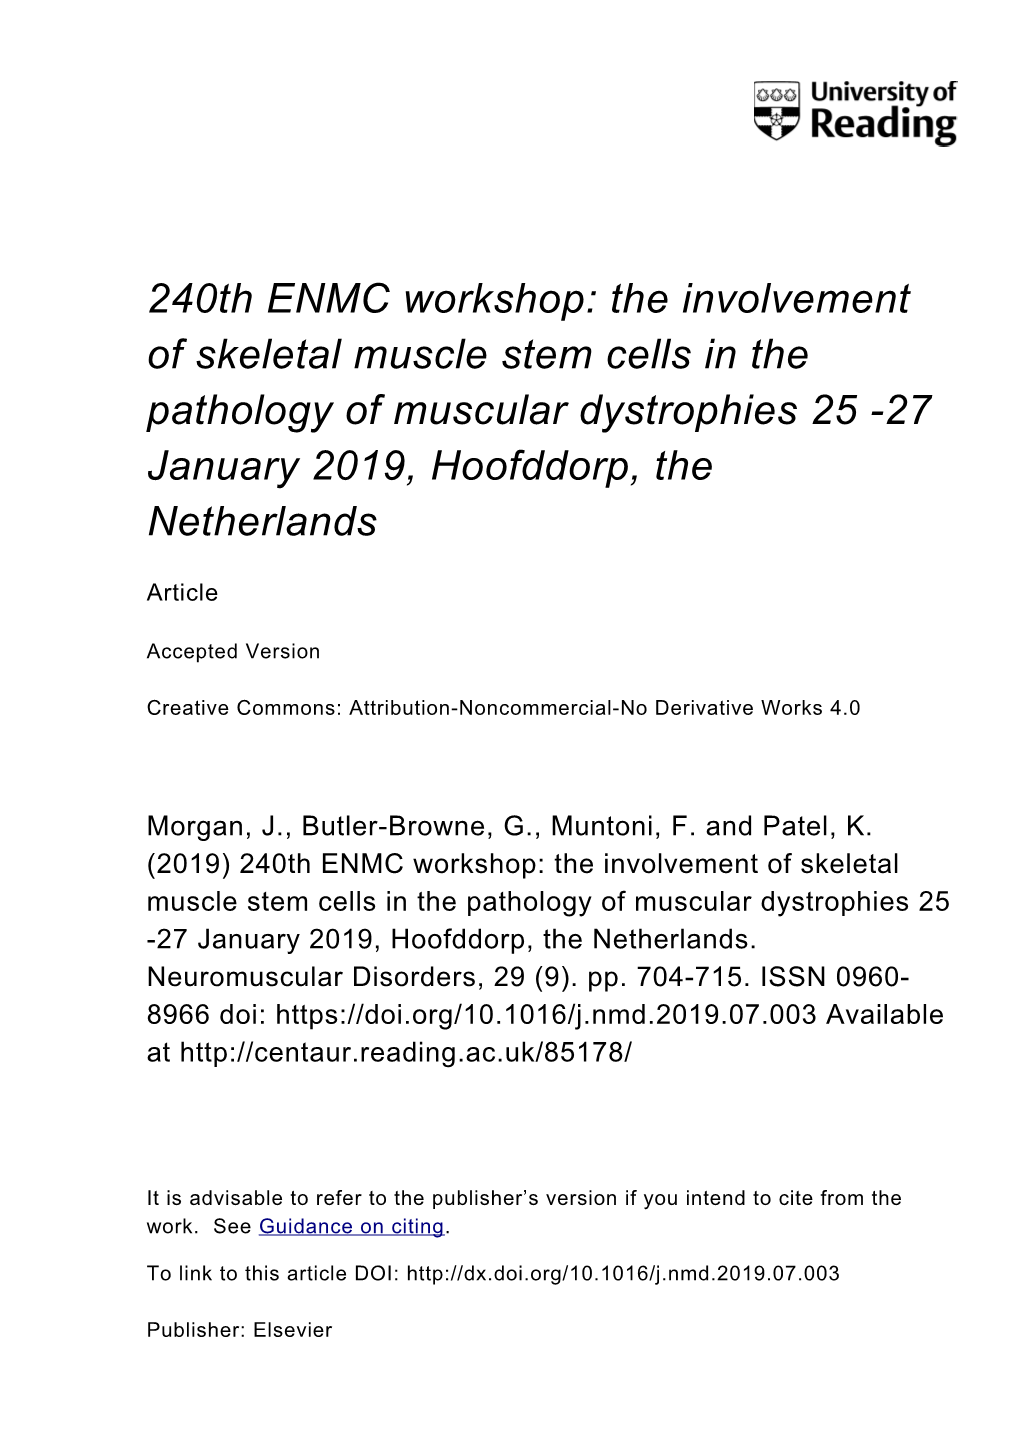 240Th ENMC Workshop: the Involvement of Skeletal Muscle Stem Cells in the Pathology of Muscular Dystrophies 25 -27 January 2019, Hoofddorp, the Netherlands